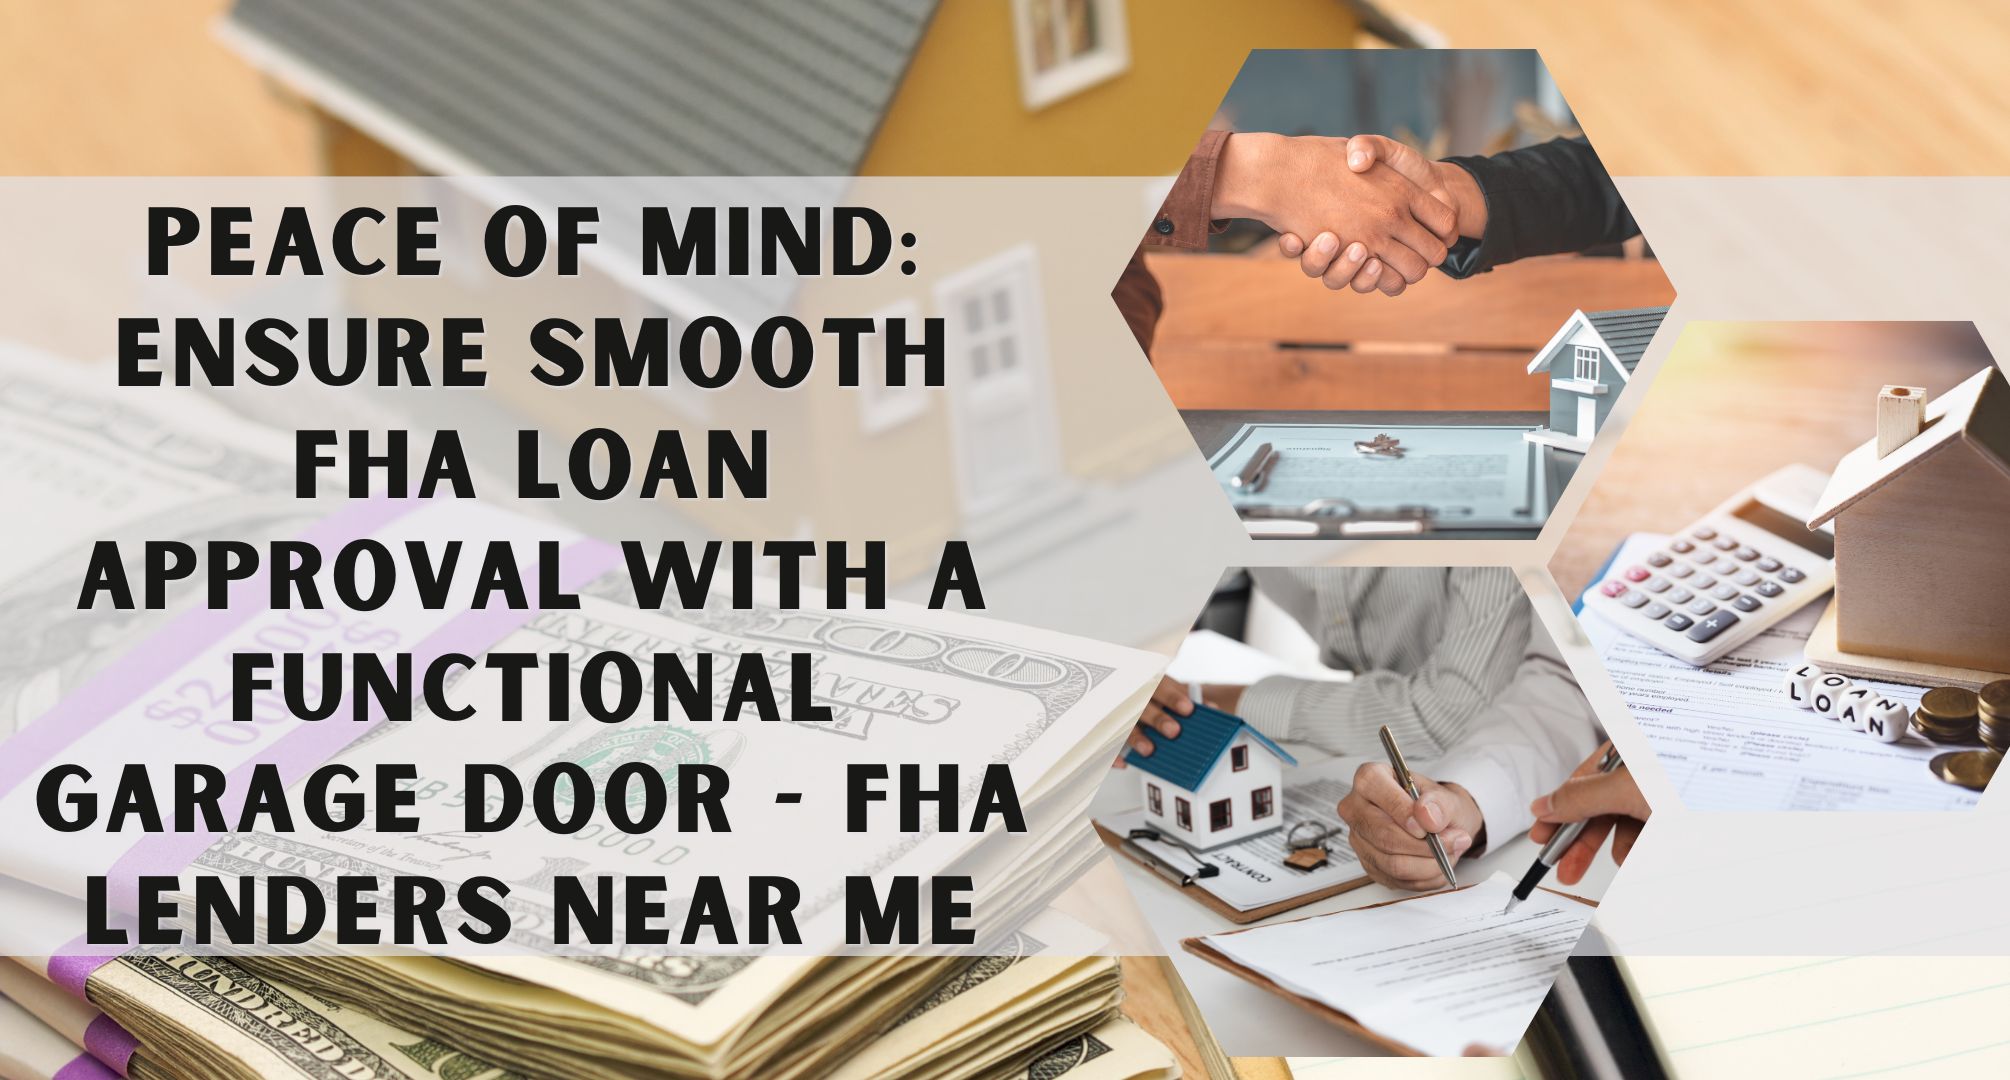 Peace of Mind: Ensure Smooth FHA Loan Approval with a Functional Garage Door - FHA Lenders Near Me